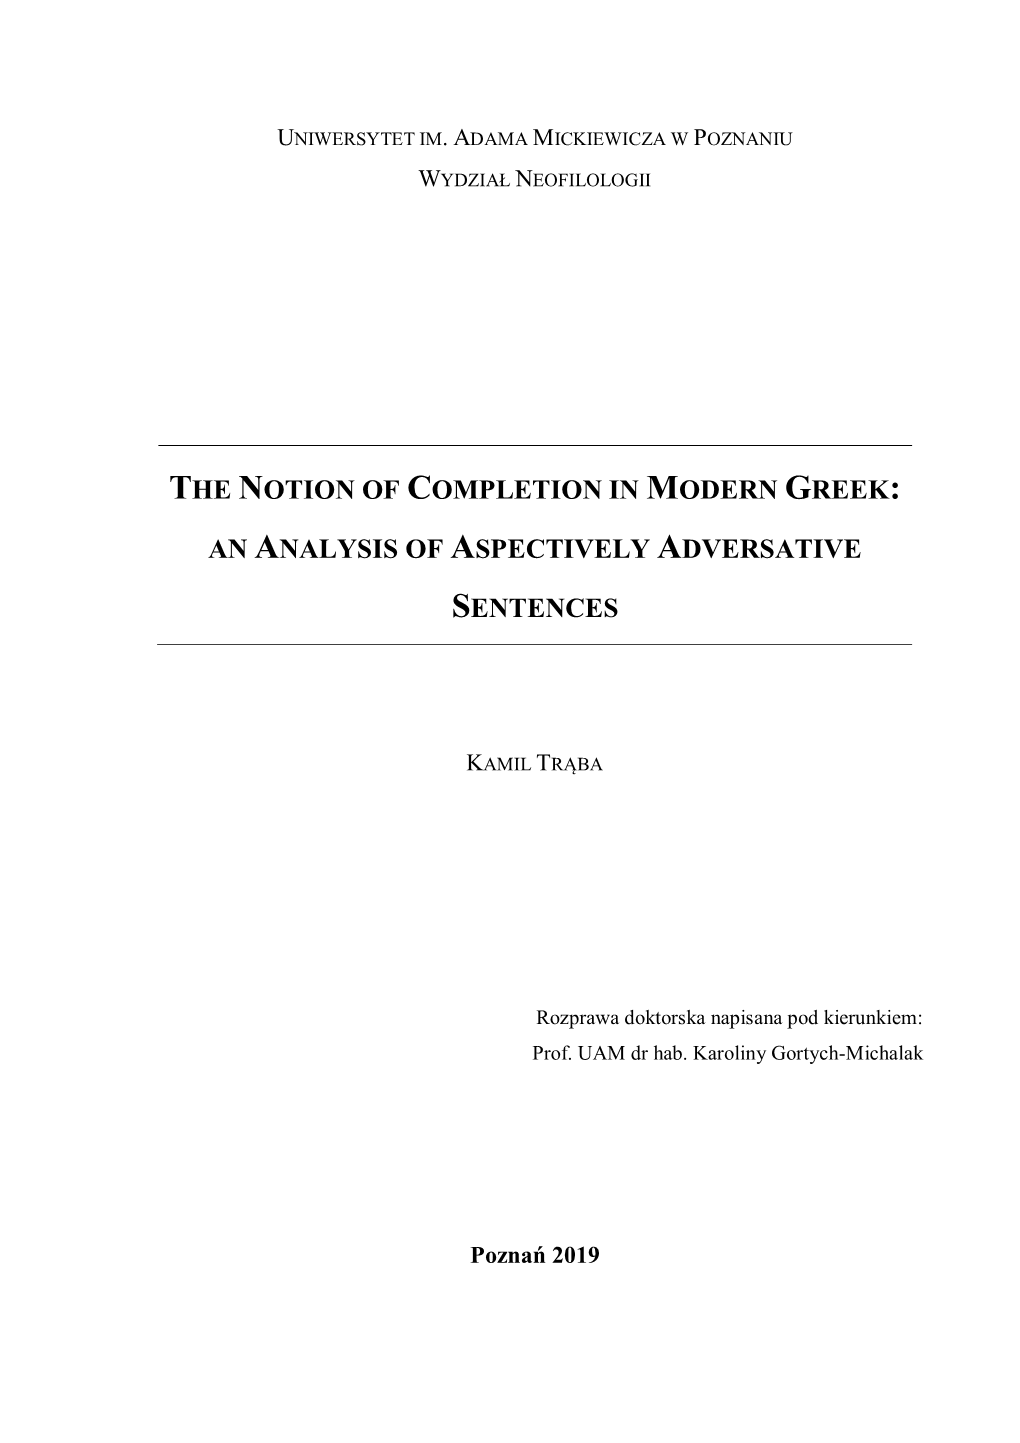 The Notion of Completion in Modern Greek